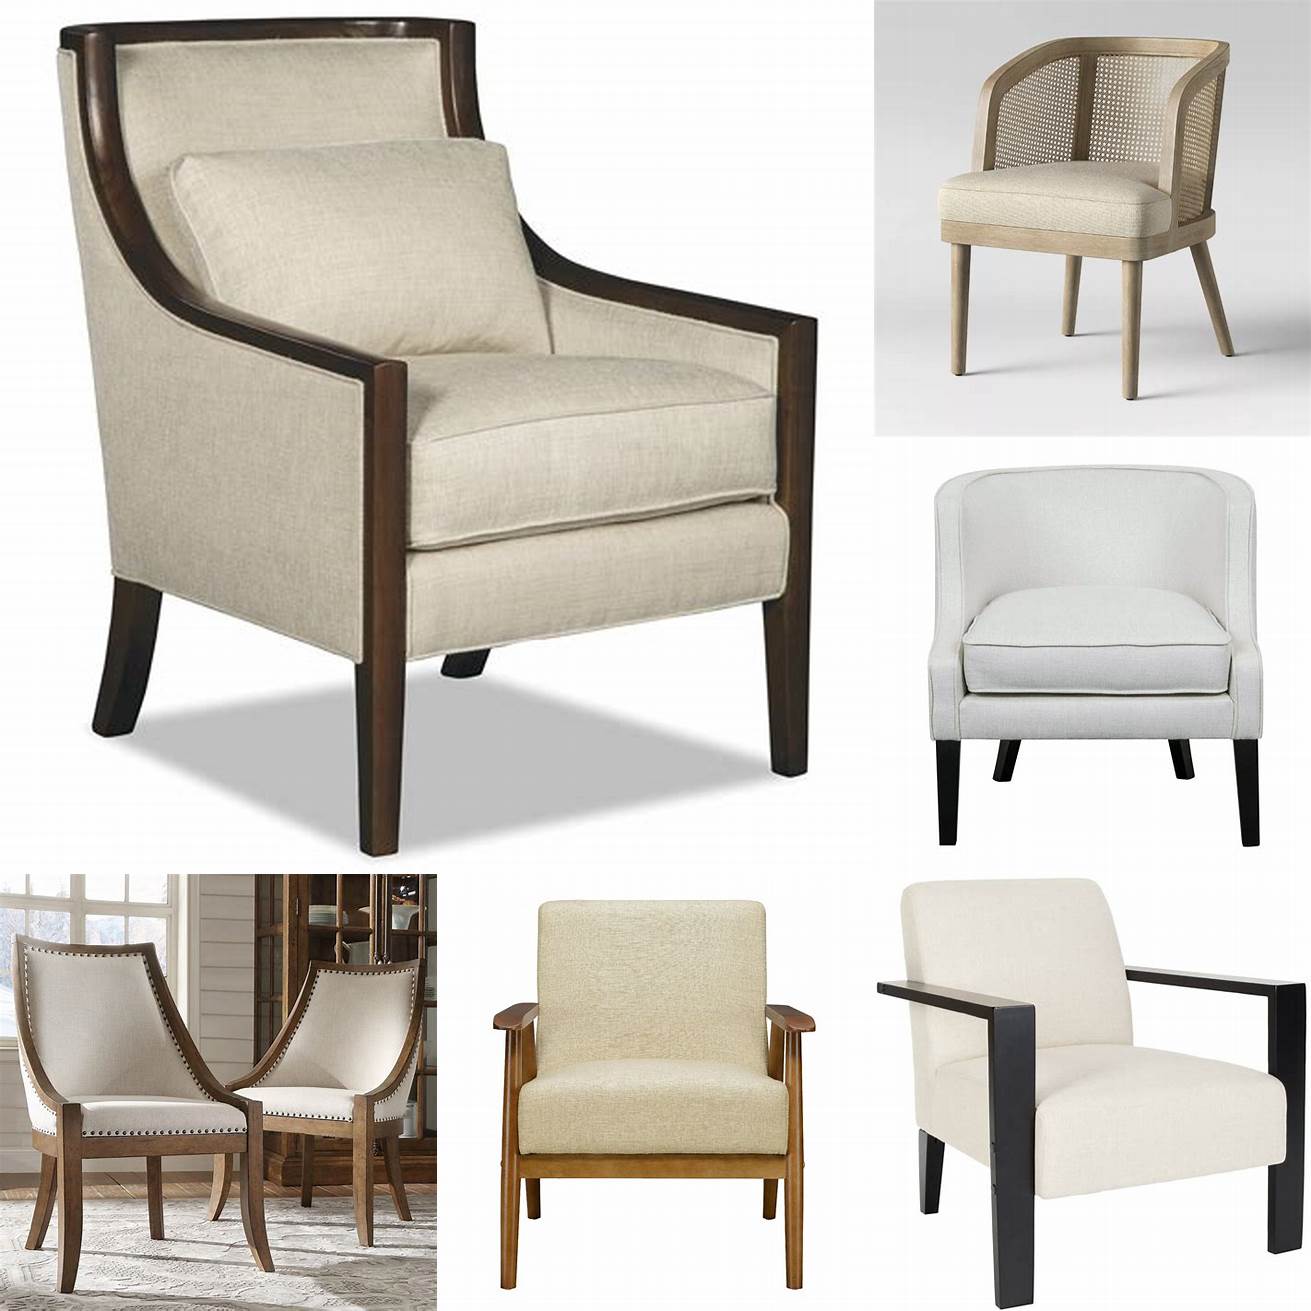 A white accent chair with a wooden frame and upholstered seat